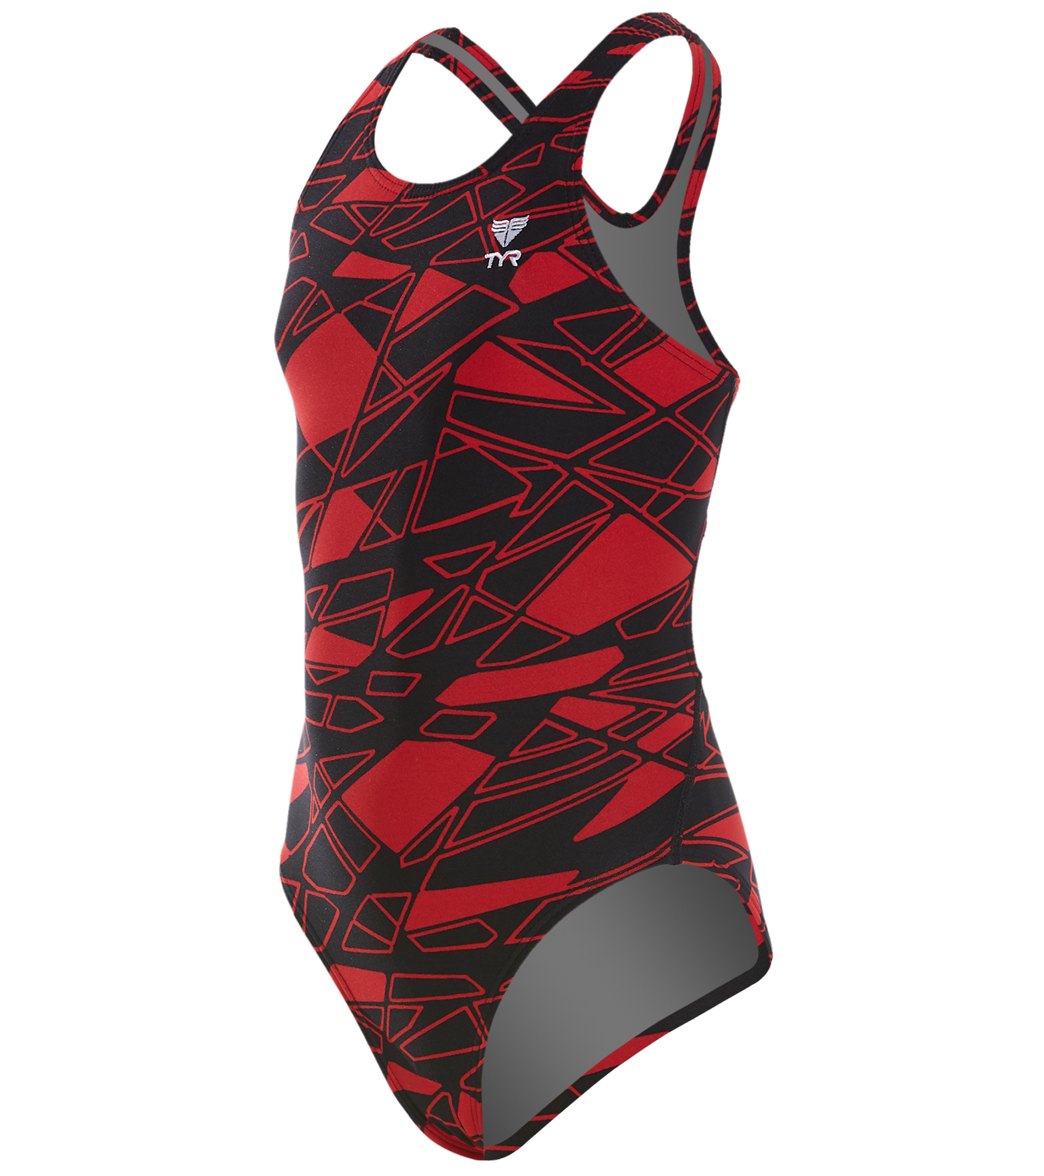 TYR Girls' Mantova Maxfit One Piece Swimsuit - Red 24 Polyester - Swimoutlet.com